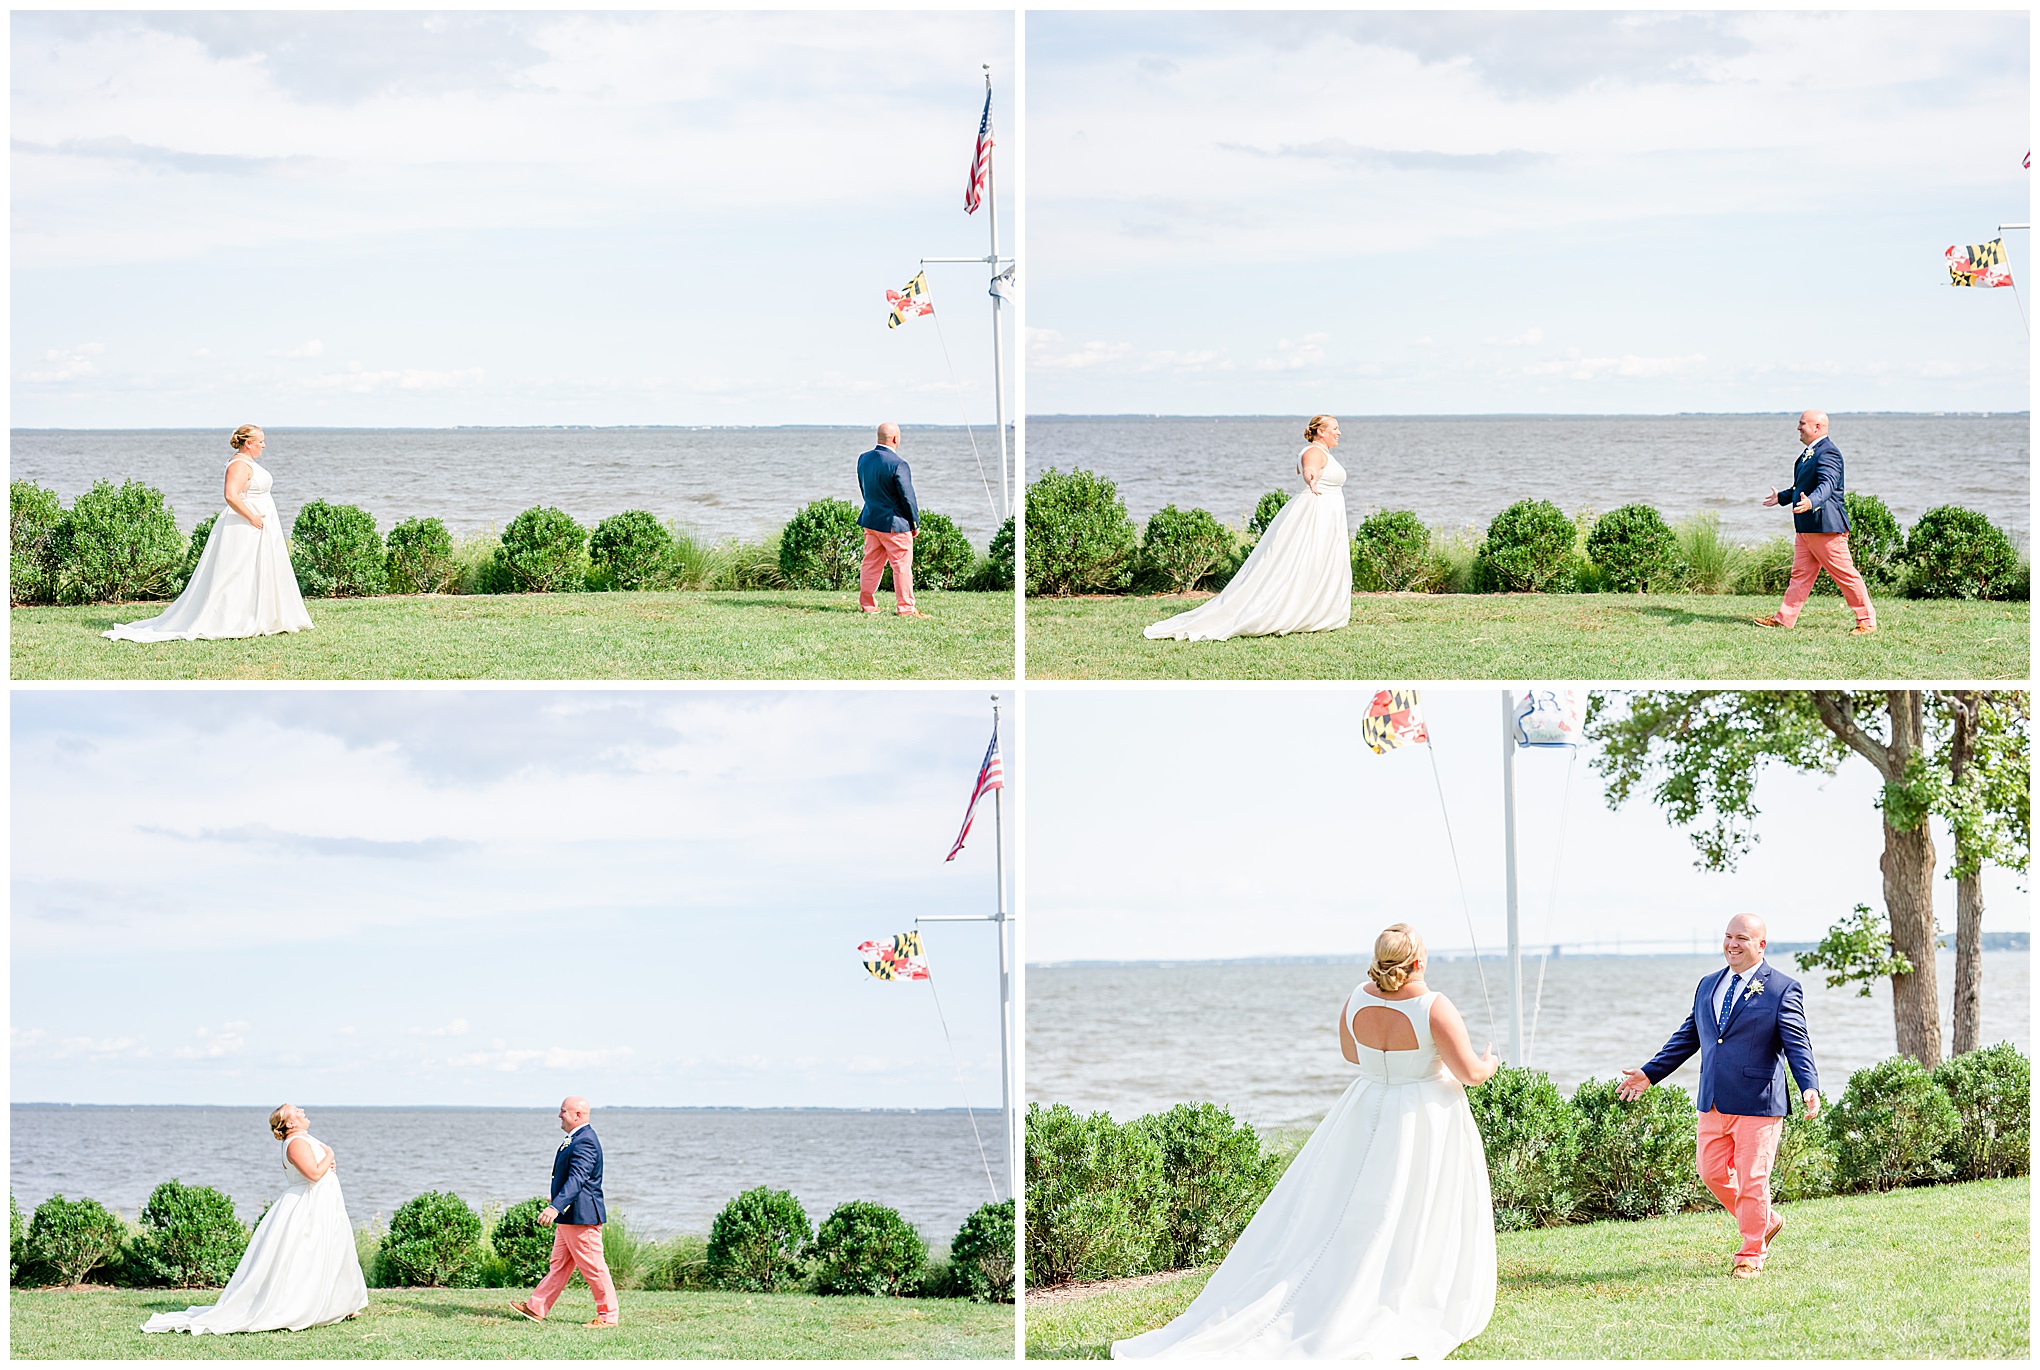 Nantucket inspired Gibson Island Club wedding, nautical wedding inspiration, Annapolitan wedding inspiration, Gibson Island Club wedding photography, Gibson Island Club wedding photographer, Annapolis wedding photographer, Baltimore wedding photographer, Maryland wedding photographer, nautical aesthetic, Annapolis wedding inspiration, Rachel E.H. Photography, bride laughing, groom walking, bride and groom on water front